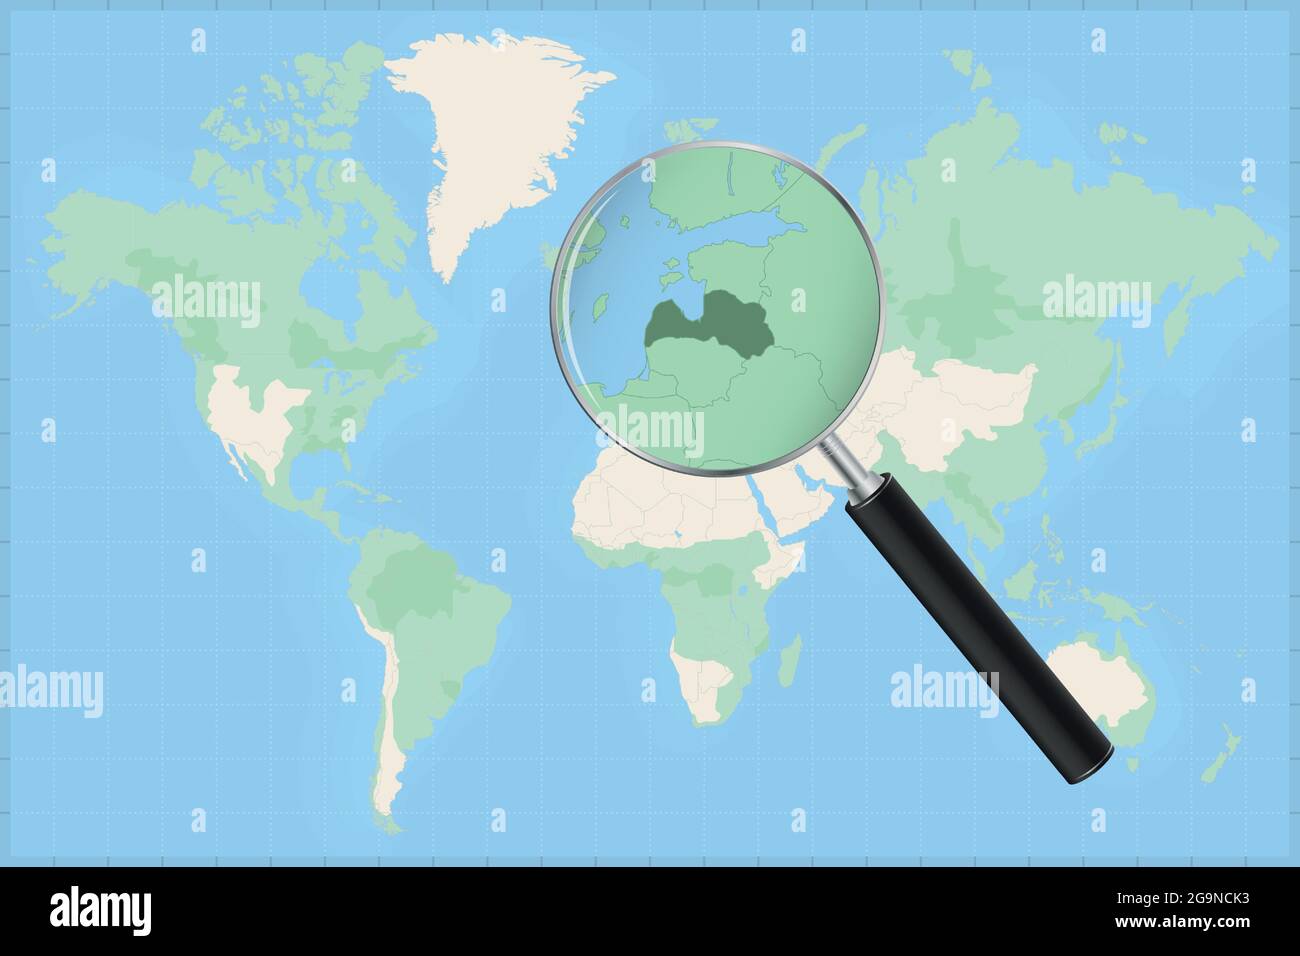 Map of the world with a magnifying glass on a map of Latvia Detailed map of Latvia and neighboring countries in the magnifying glass. Stock Vector